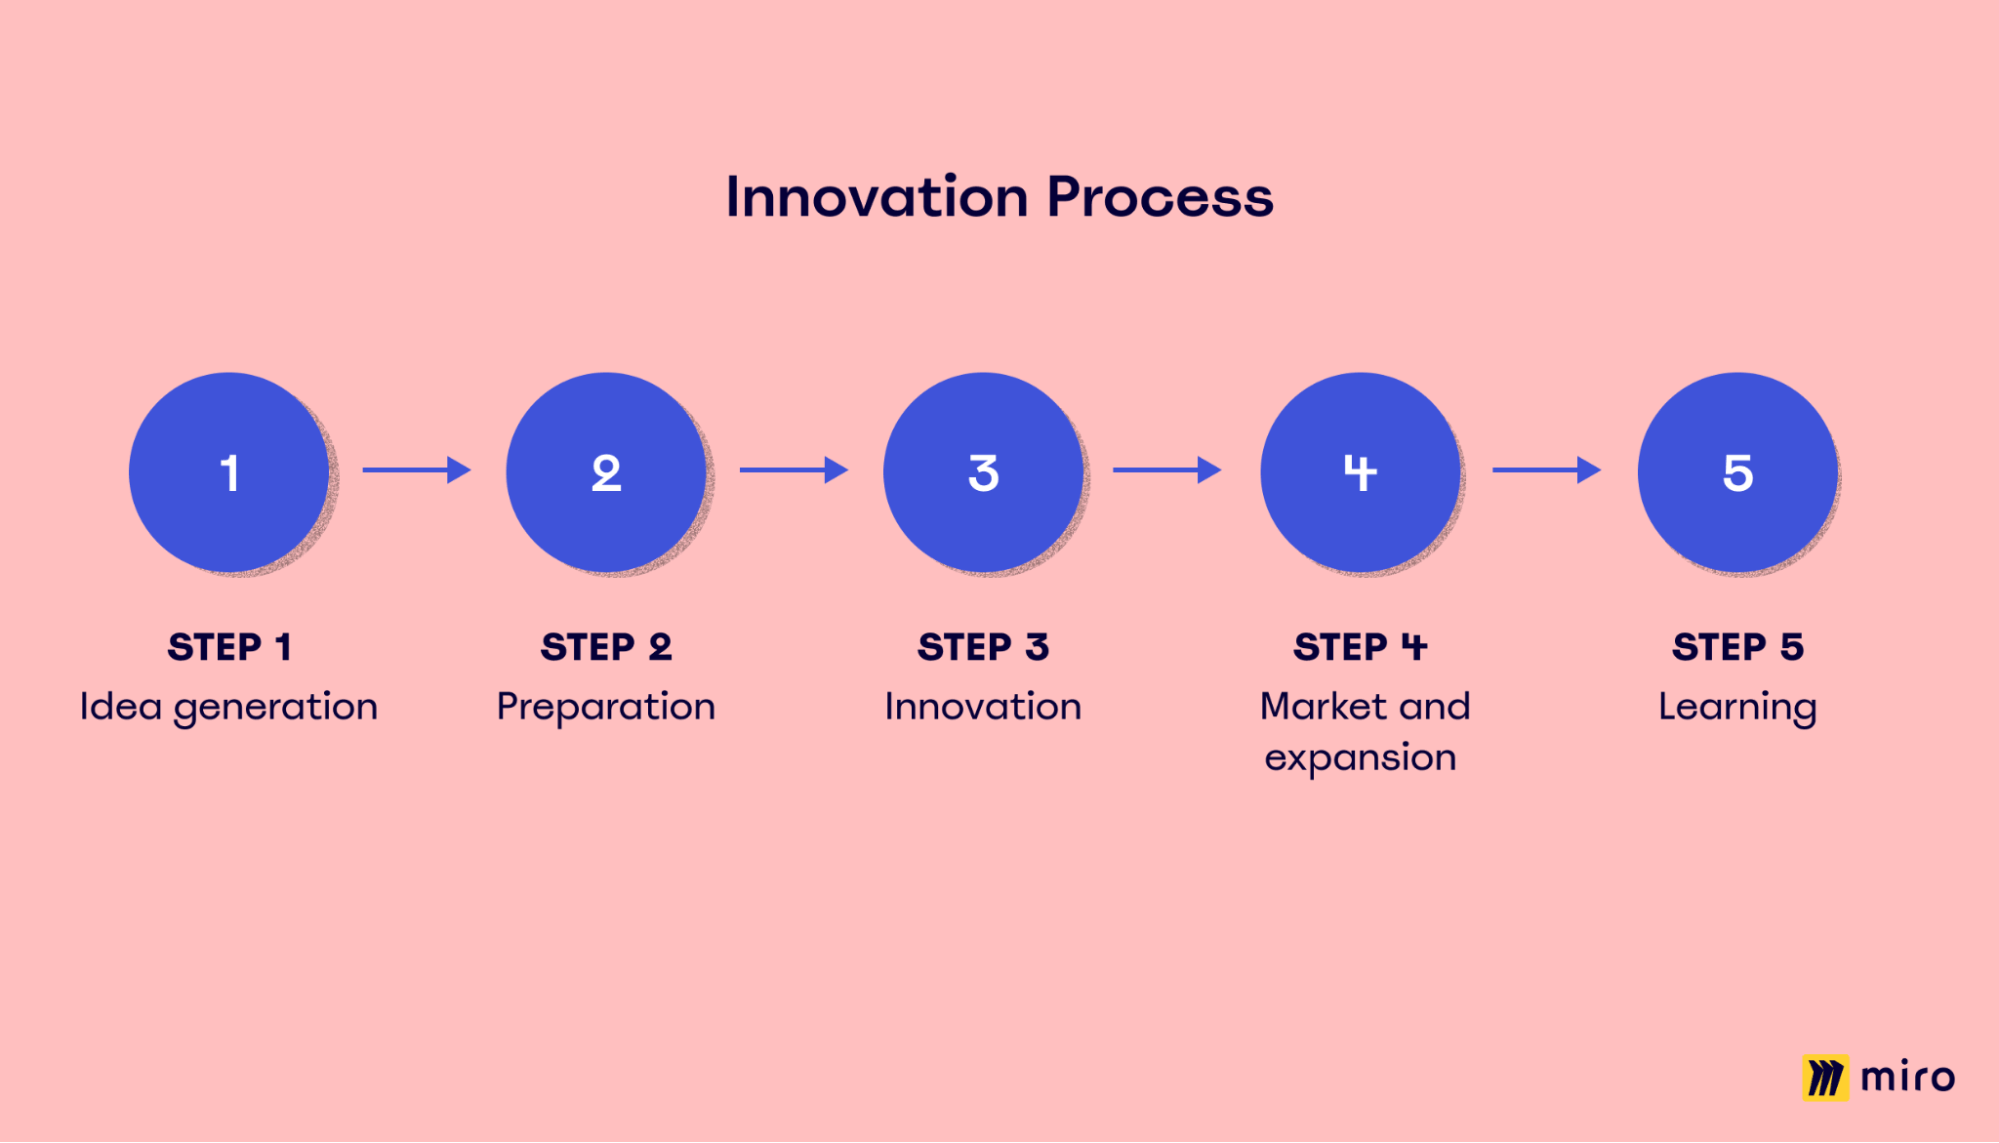 Five key stages of the innovation process